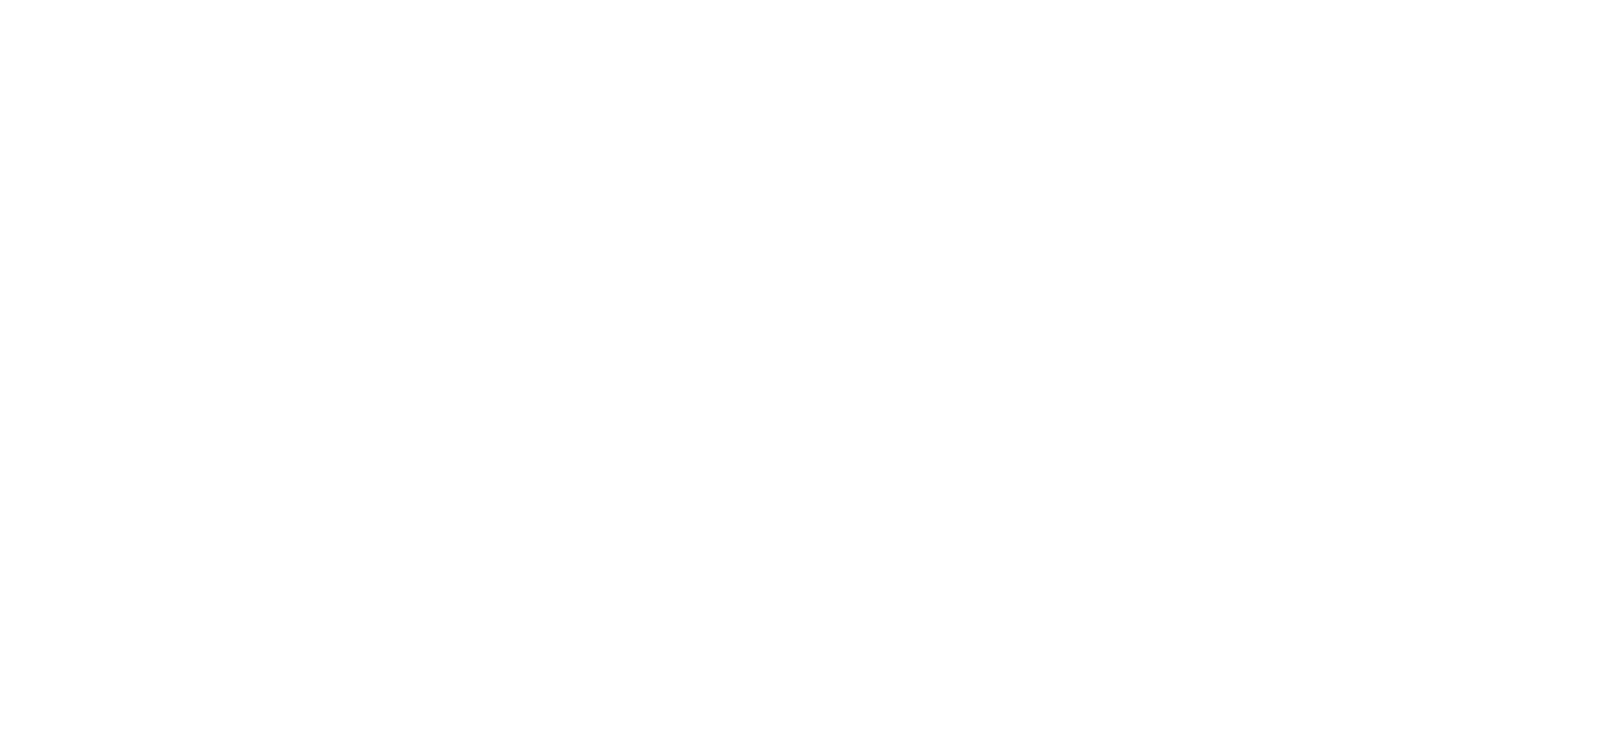 the point of no return